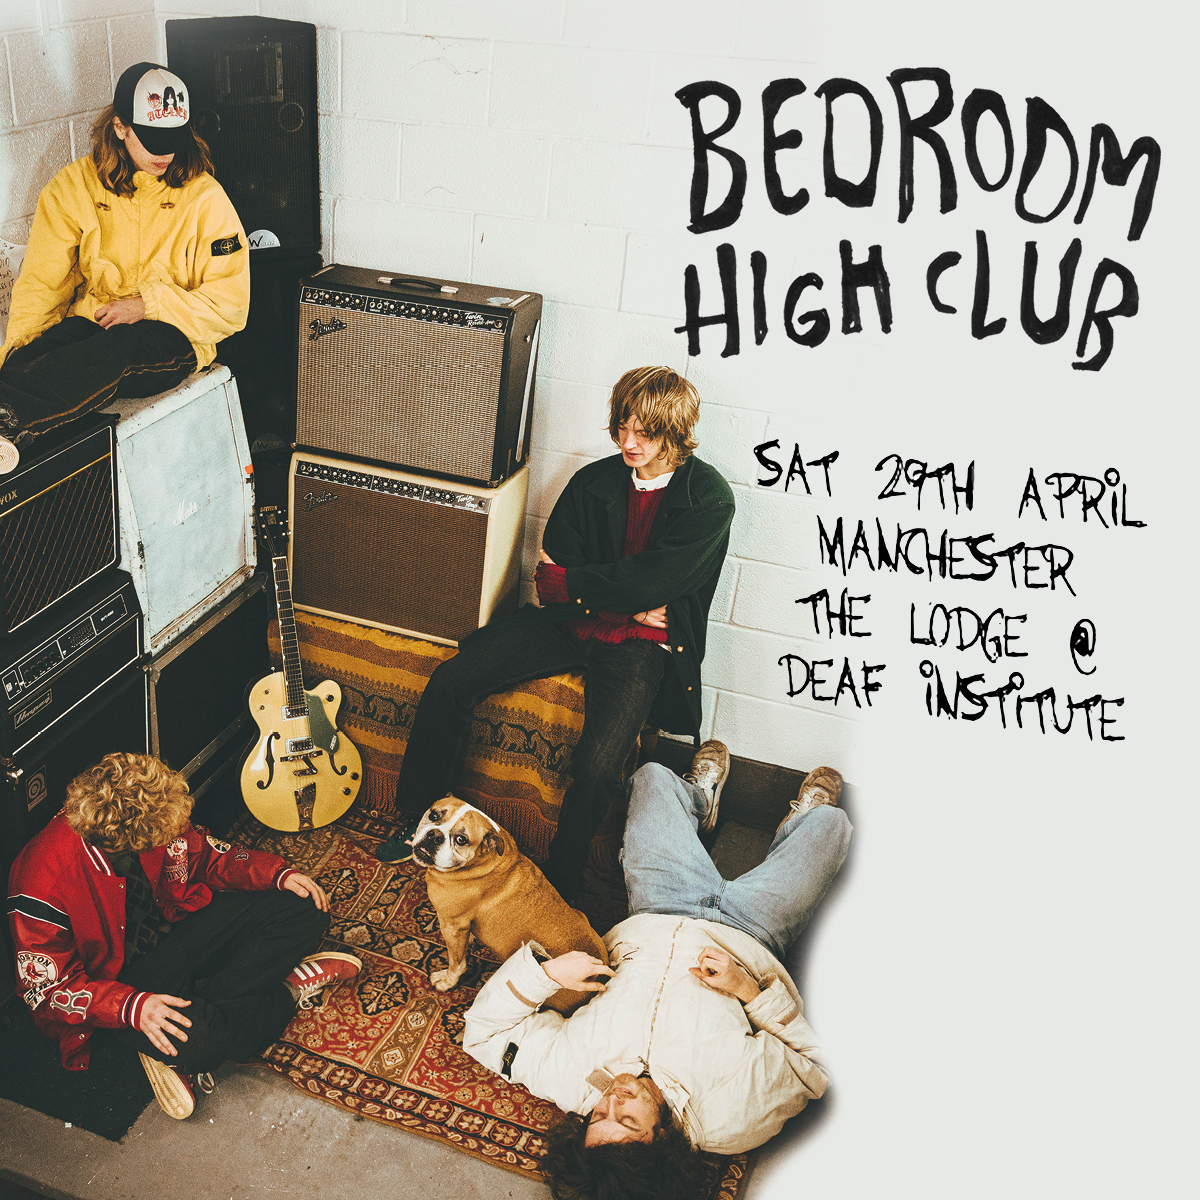 ON SALE // Catch Barnsley indie crew @bedroomhighclub at this headline show in The Lodge on 29 April. ️Tickets available now 👉 ow.ly/bzVB50MUpMi